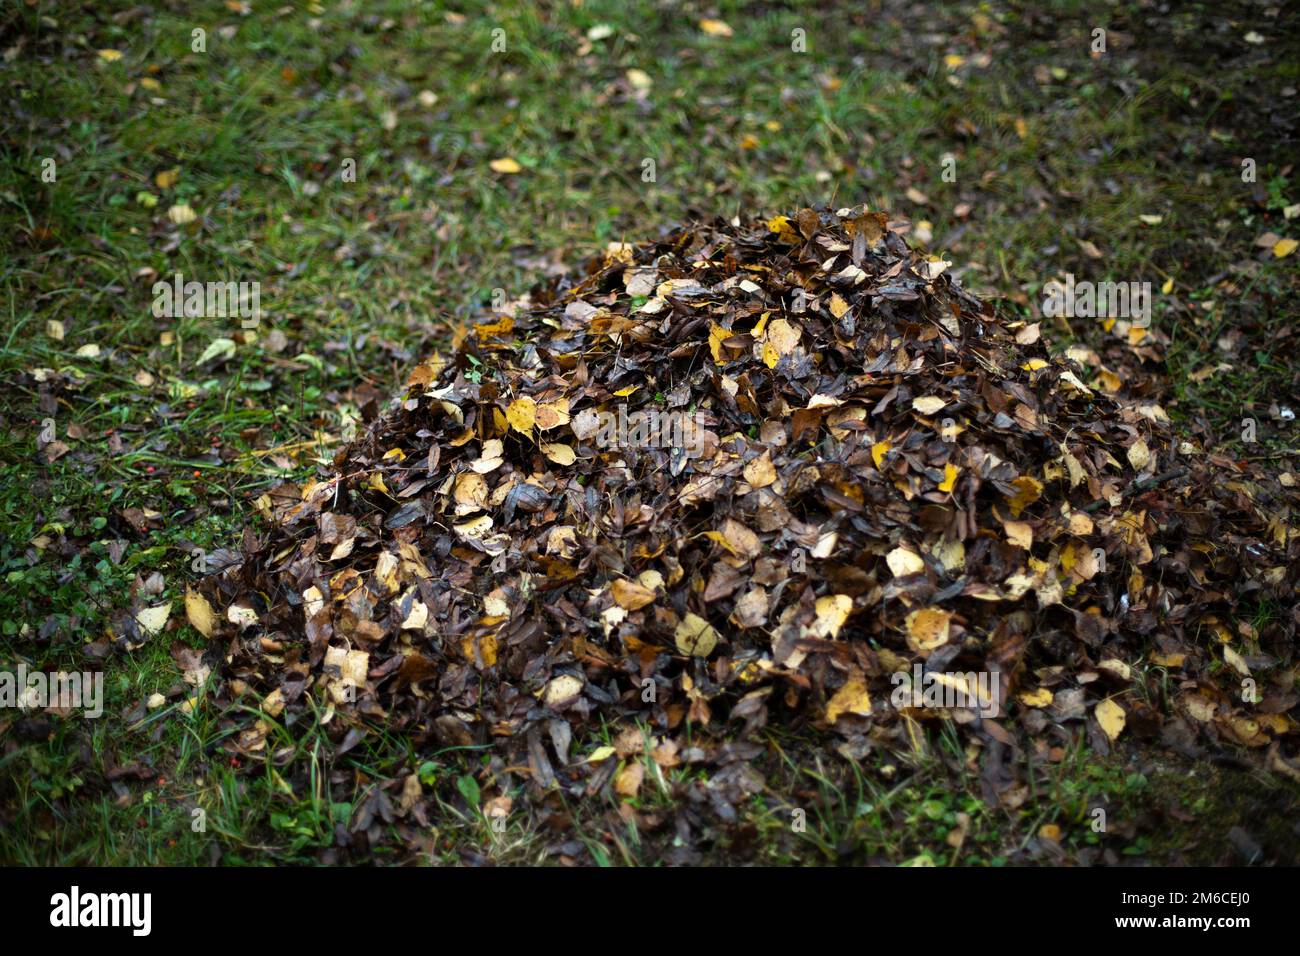 Leaves on grass. Cleaning leaves. Pile lies on lawn. Stock Photo